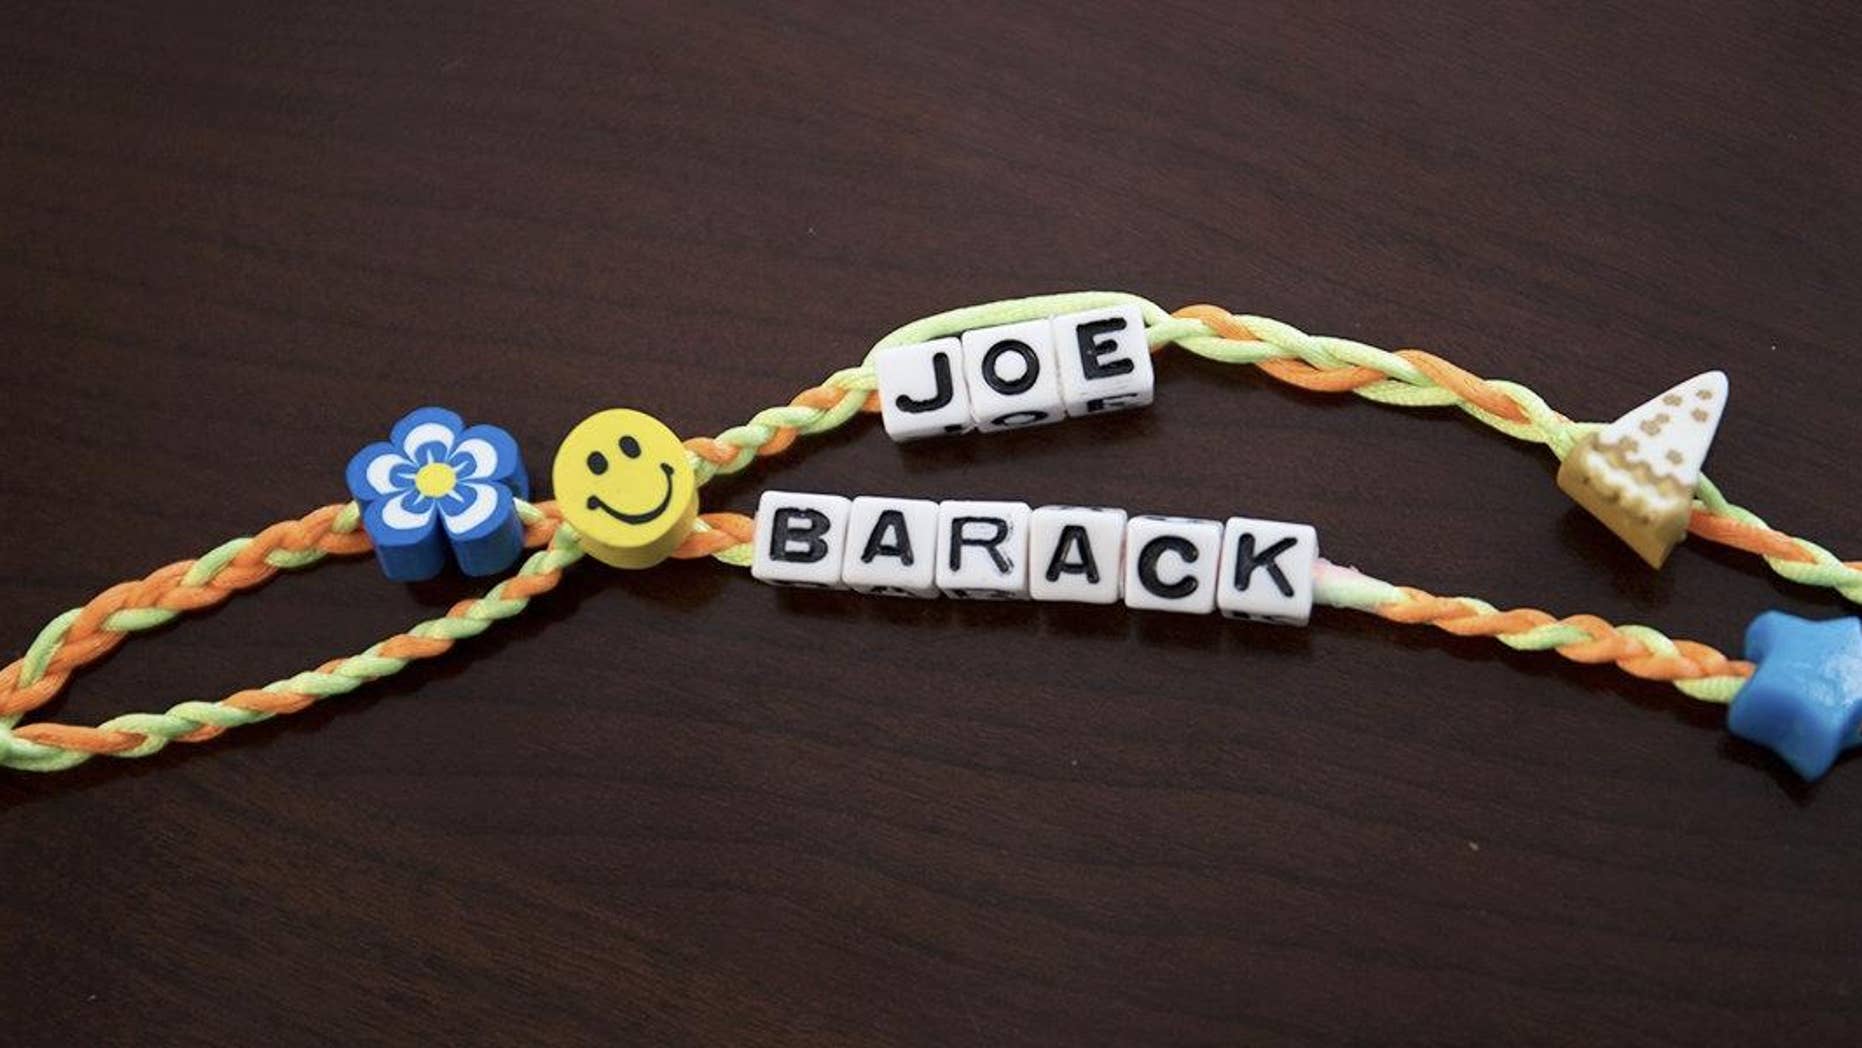 Joe Biden was called out on Twitter after tweeting to Barack Obama on 'Best Friend Day.'